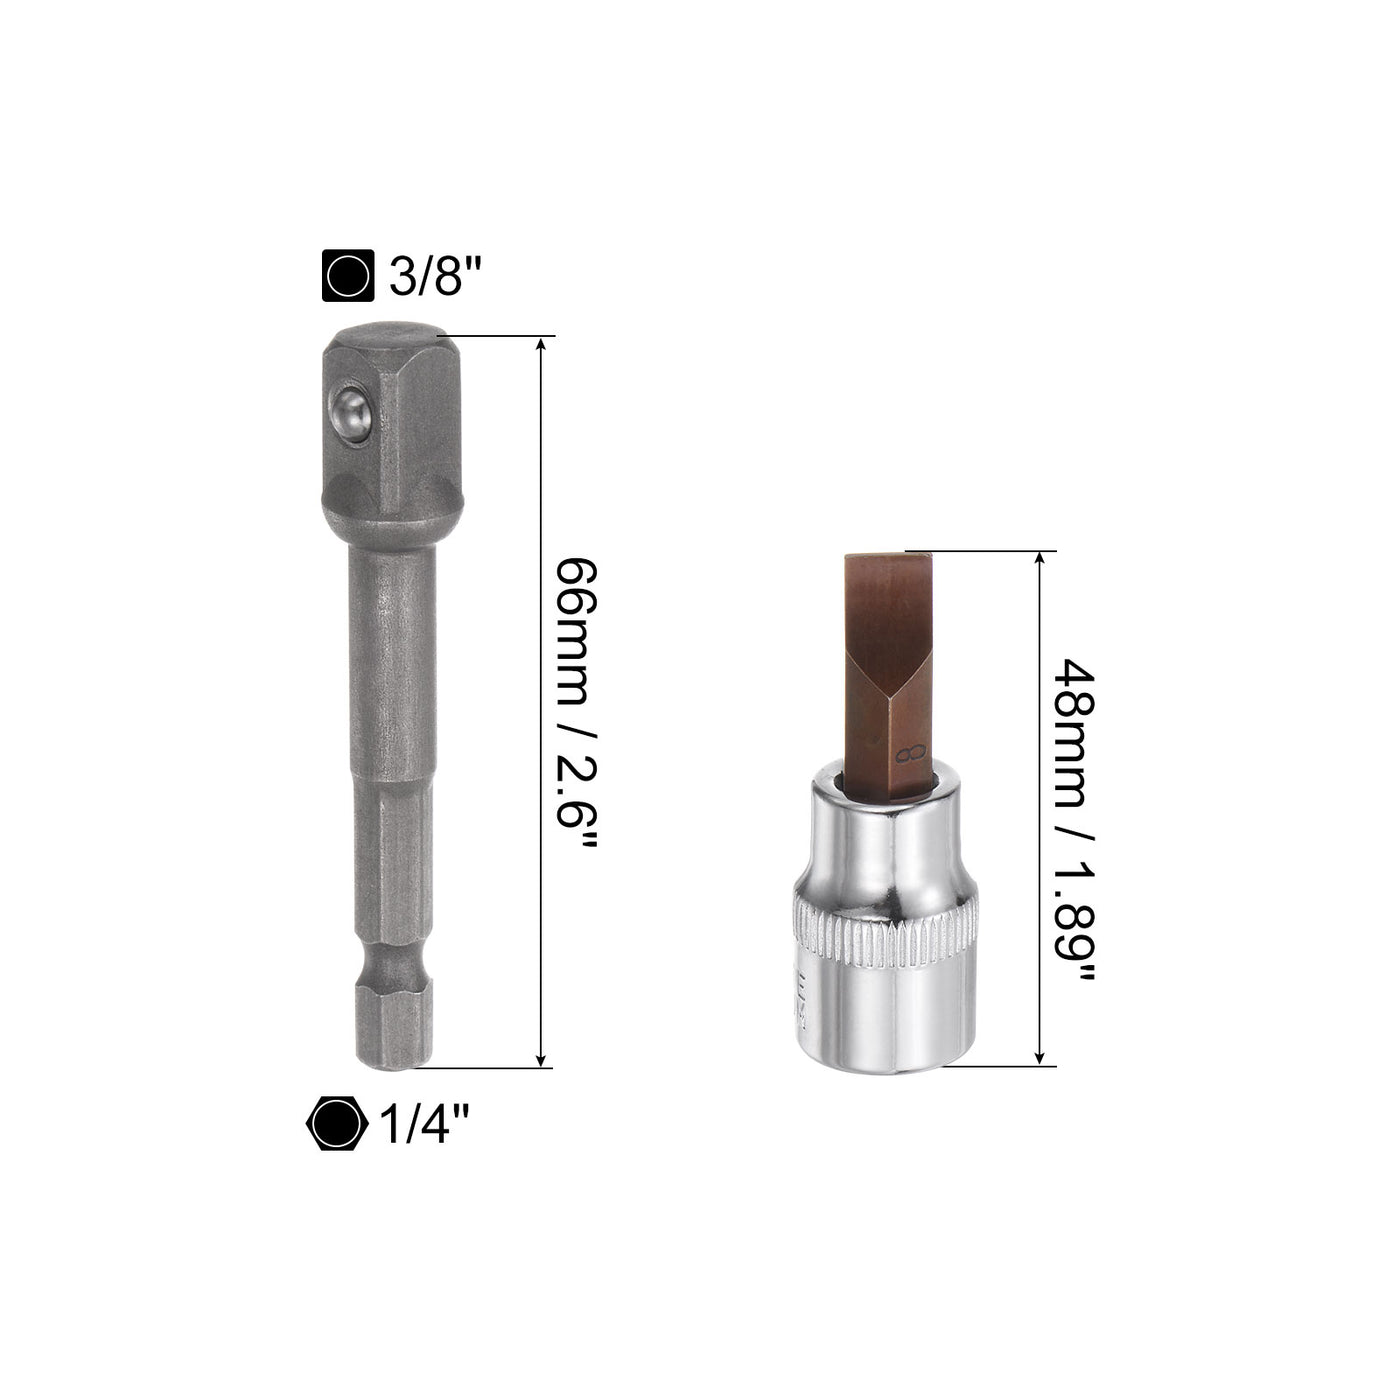 uxcell Uxcell FD8 Slotted Bit Socket, 3/8" Drive 1.89" Length W Hex Shank Power Drill Adapter